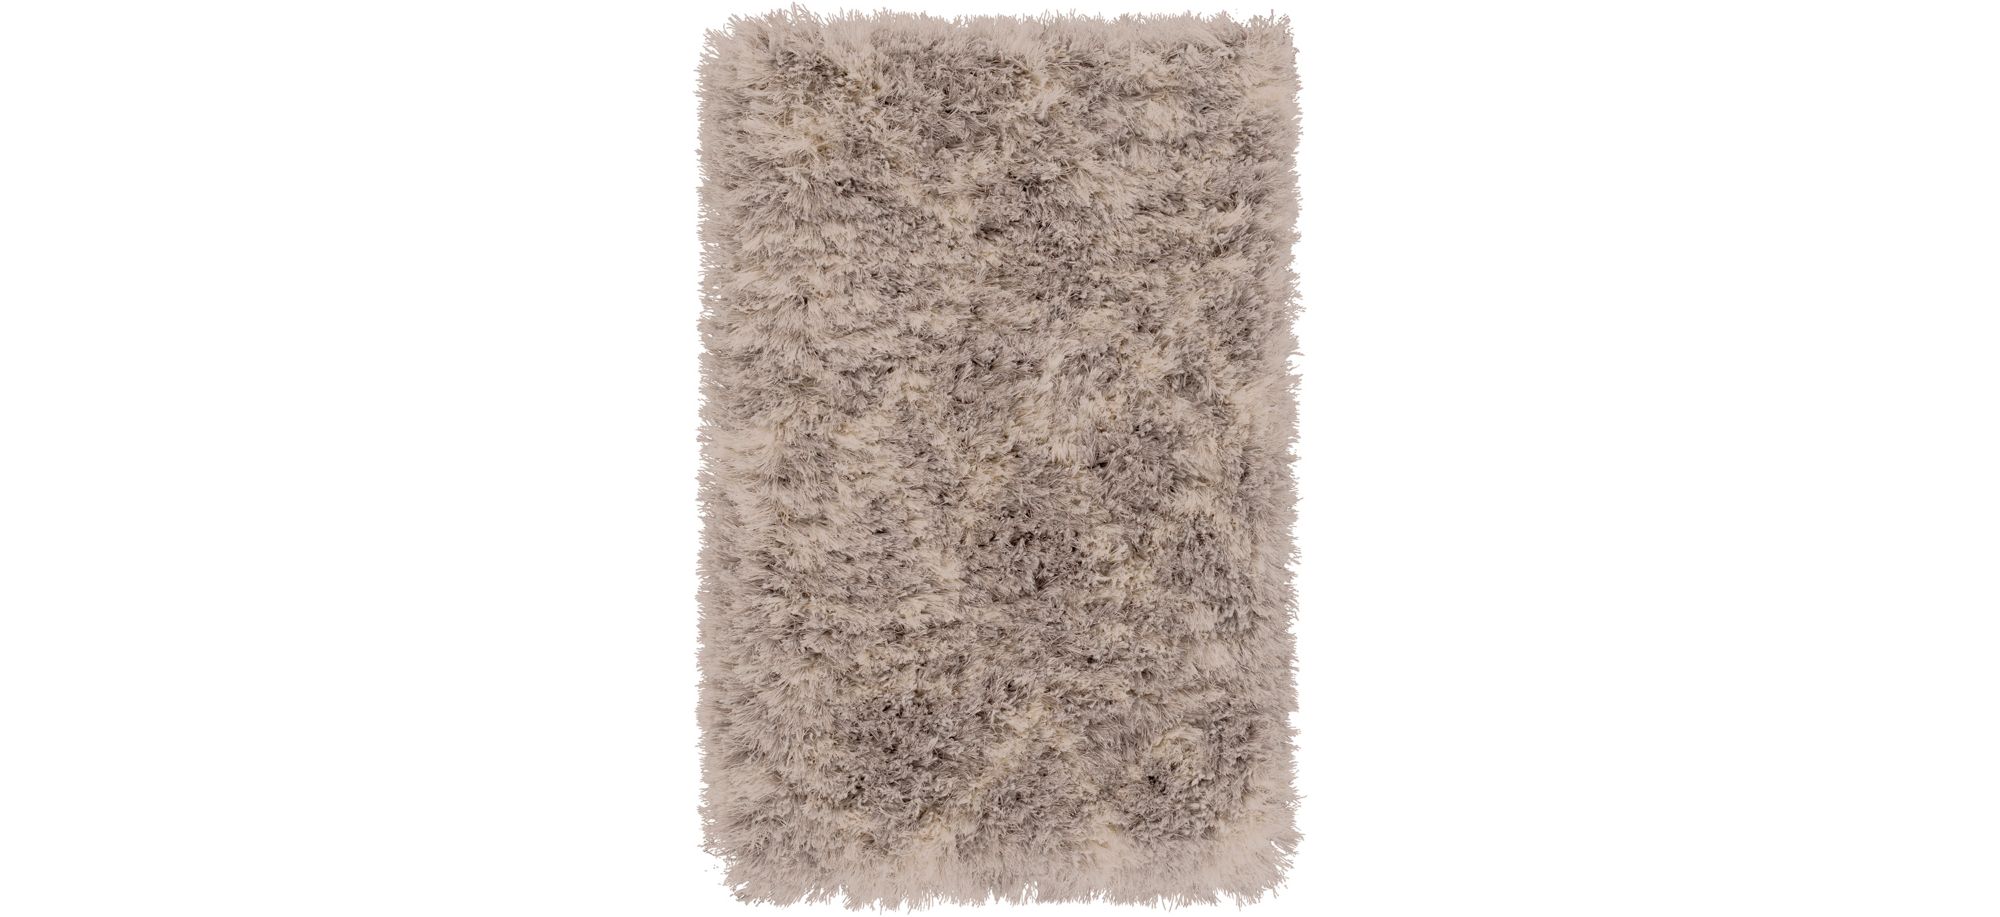 Rapture Brown Rug in Taupe, Cream by Surya